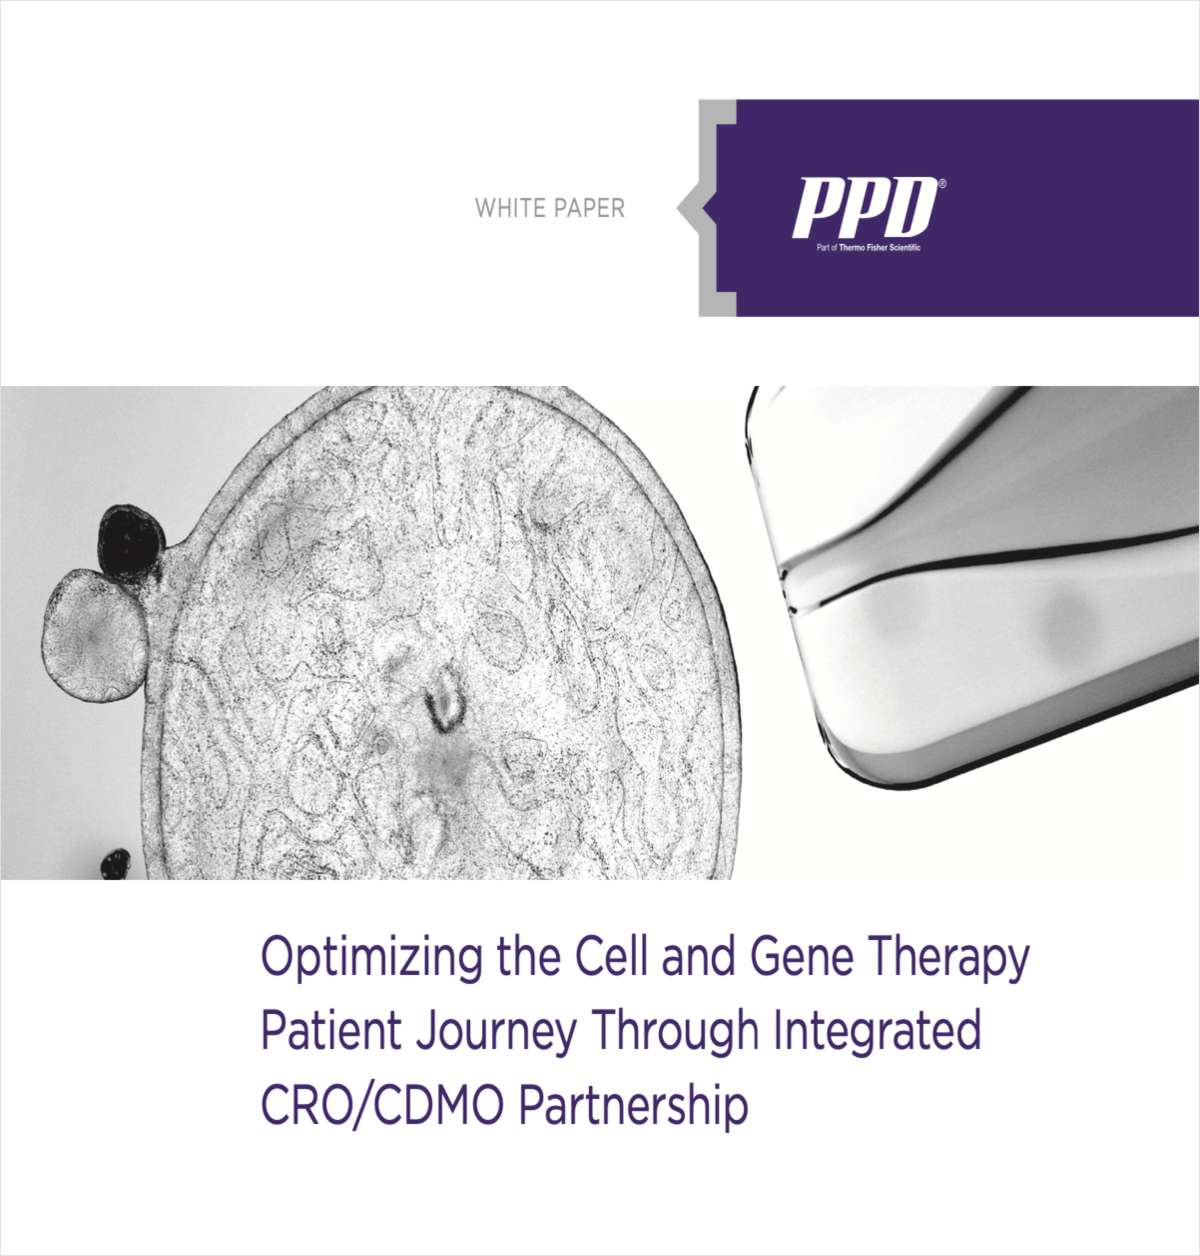 Optimizing the Cell and Gene Therapy Patient Journey